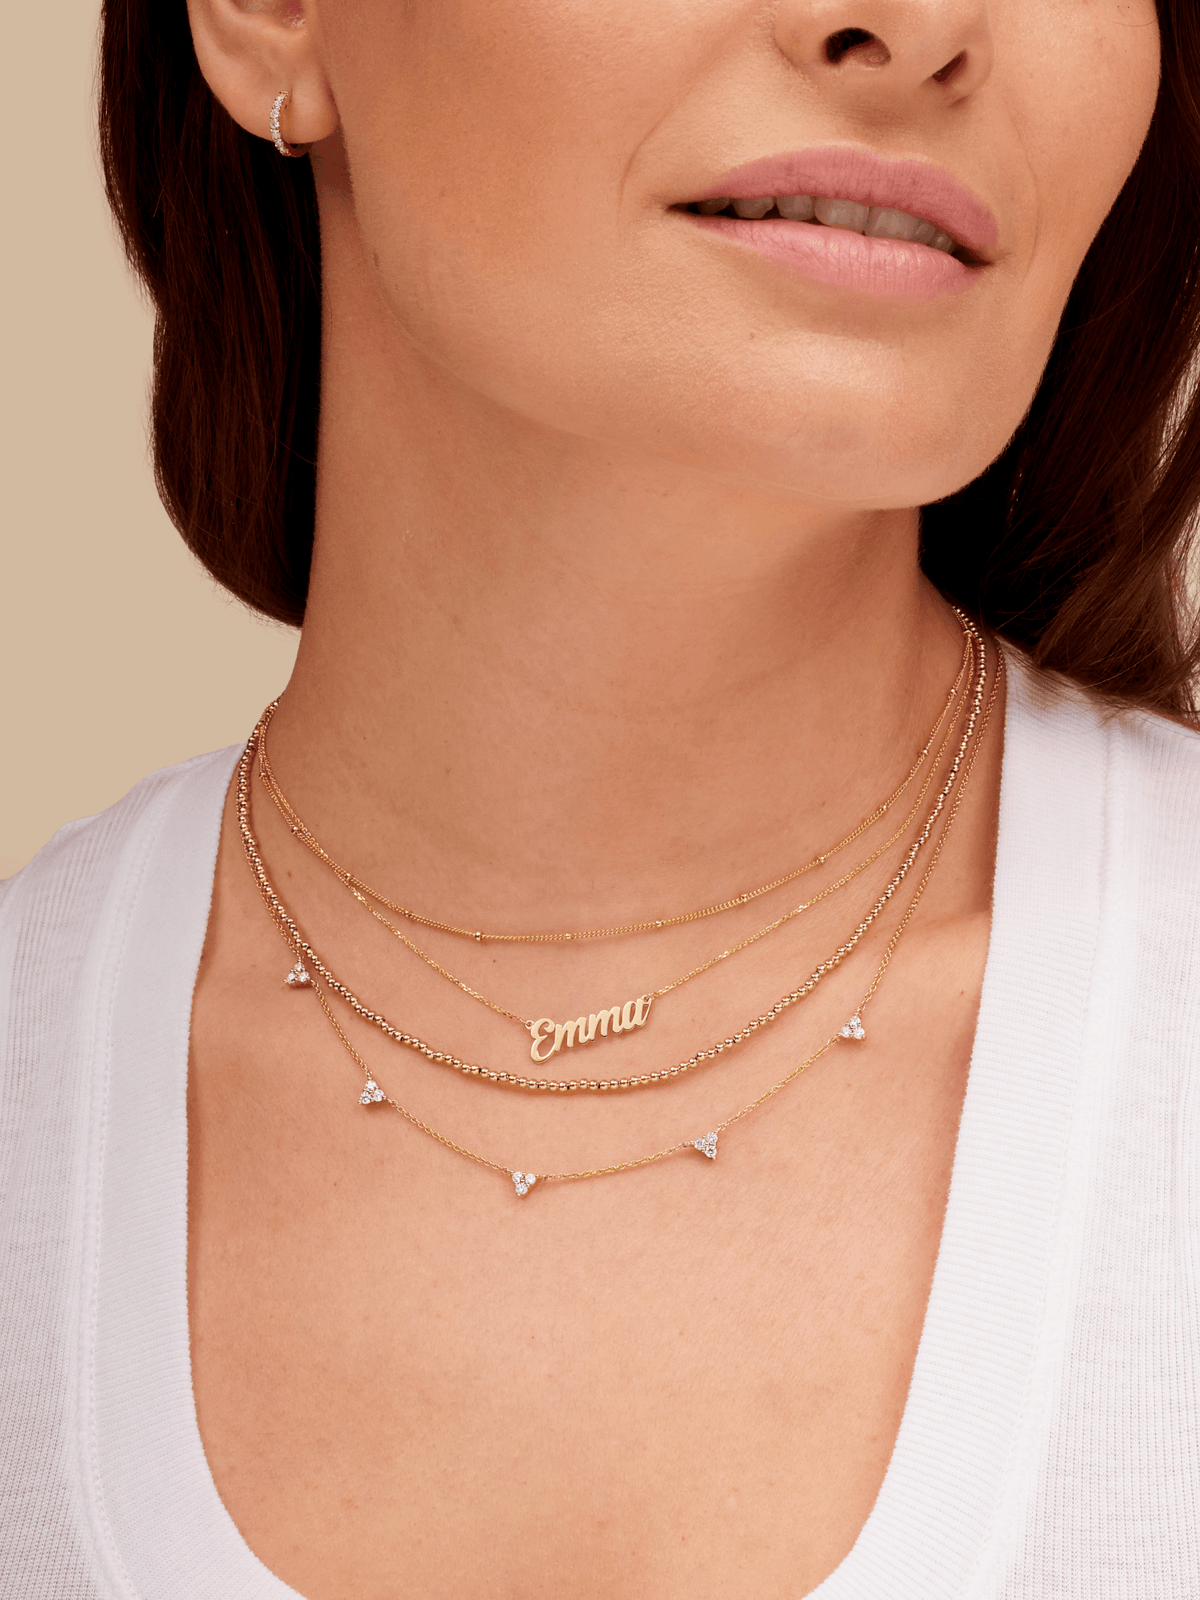 Thin gold choker necklace layered with trio diamond layering necklace, gold name necklace, and thin gold chain with small gold beads